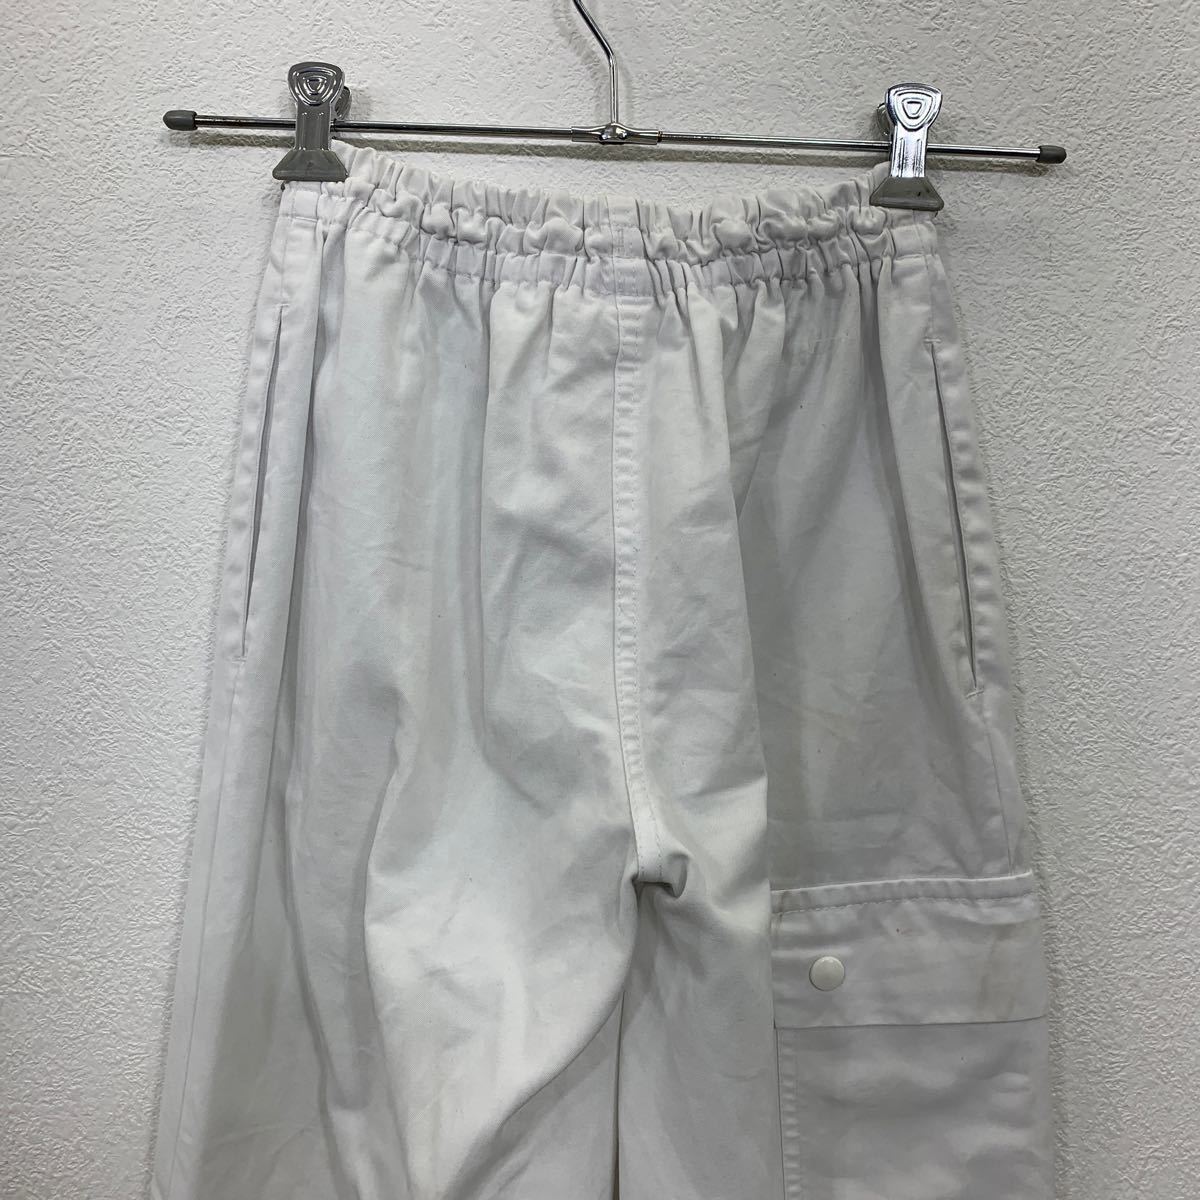 boco work pants W22 white XS size lady's old clothes . America buying up 2311-776